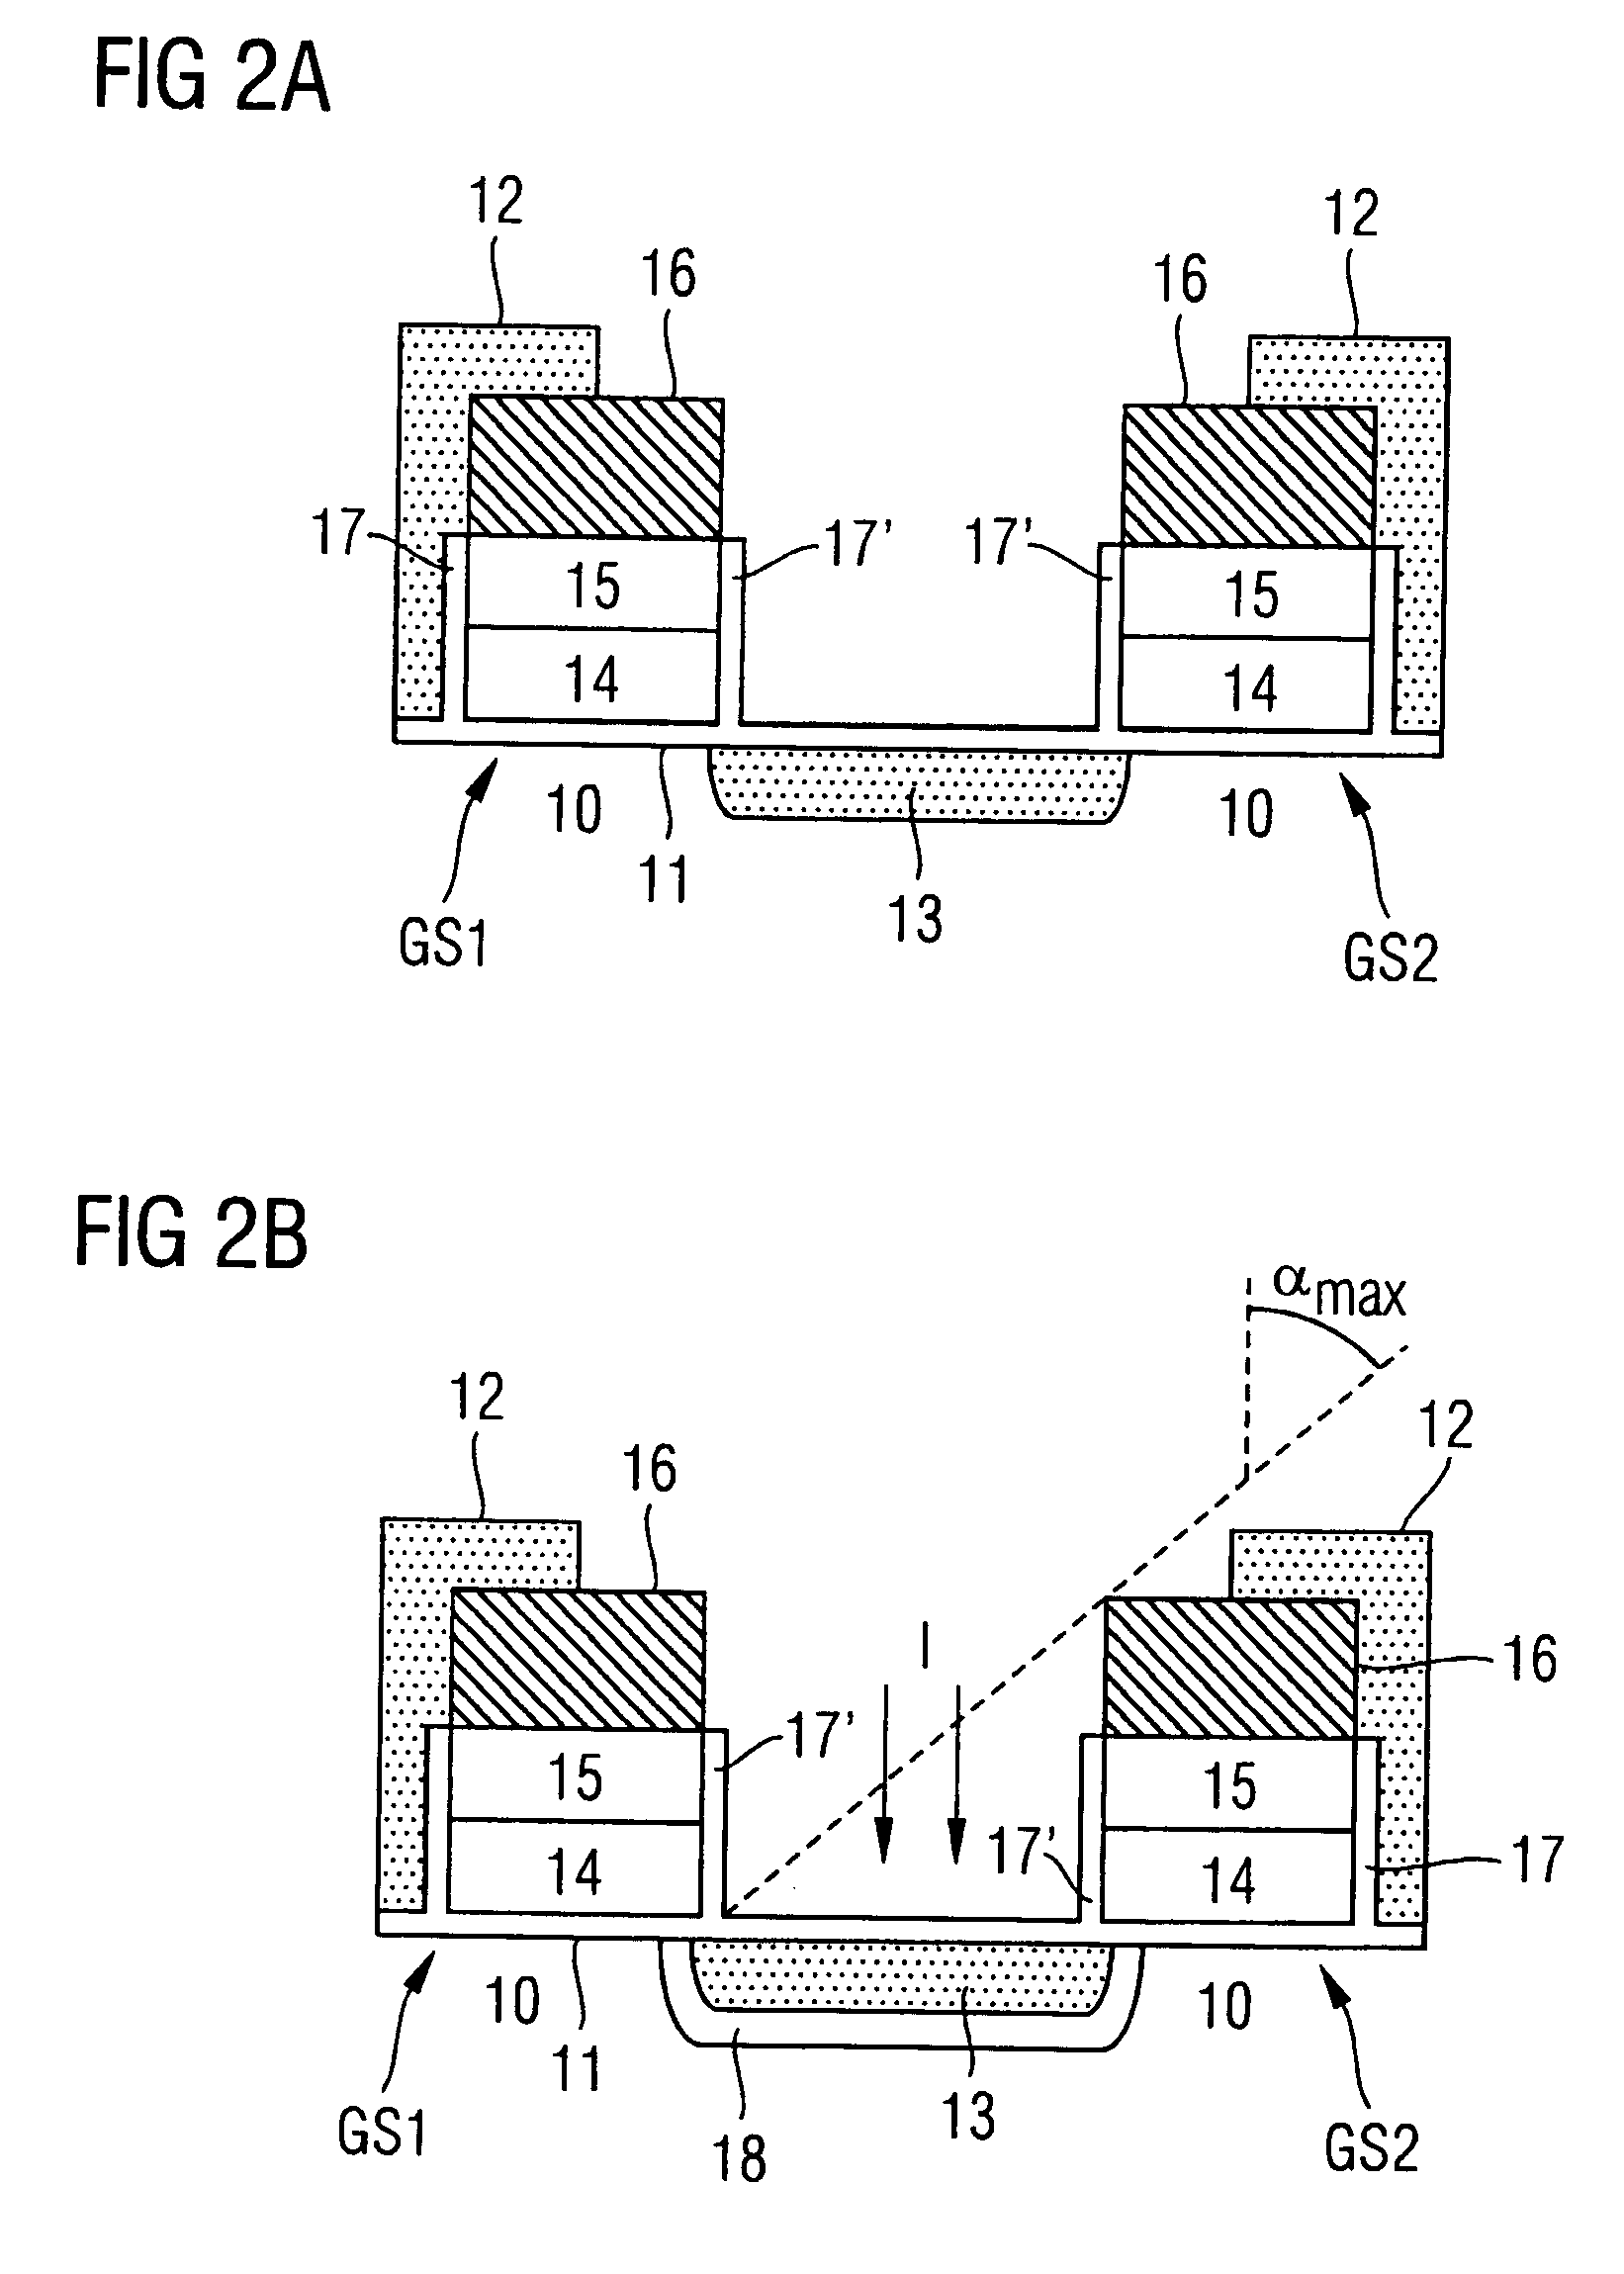 Method for fabricating a semiconductor structure